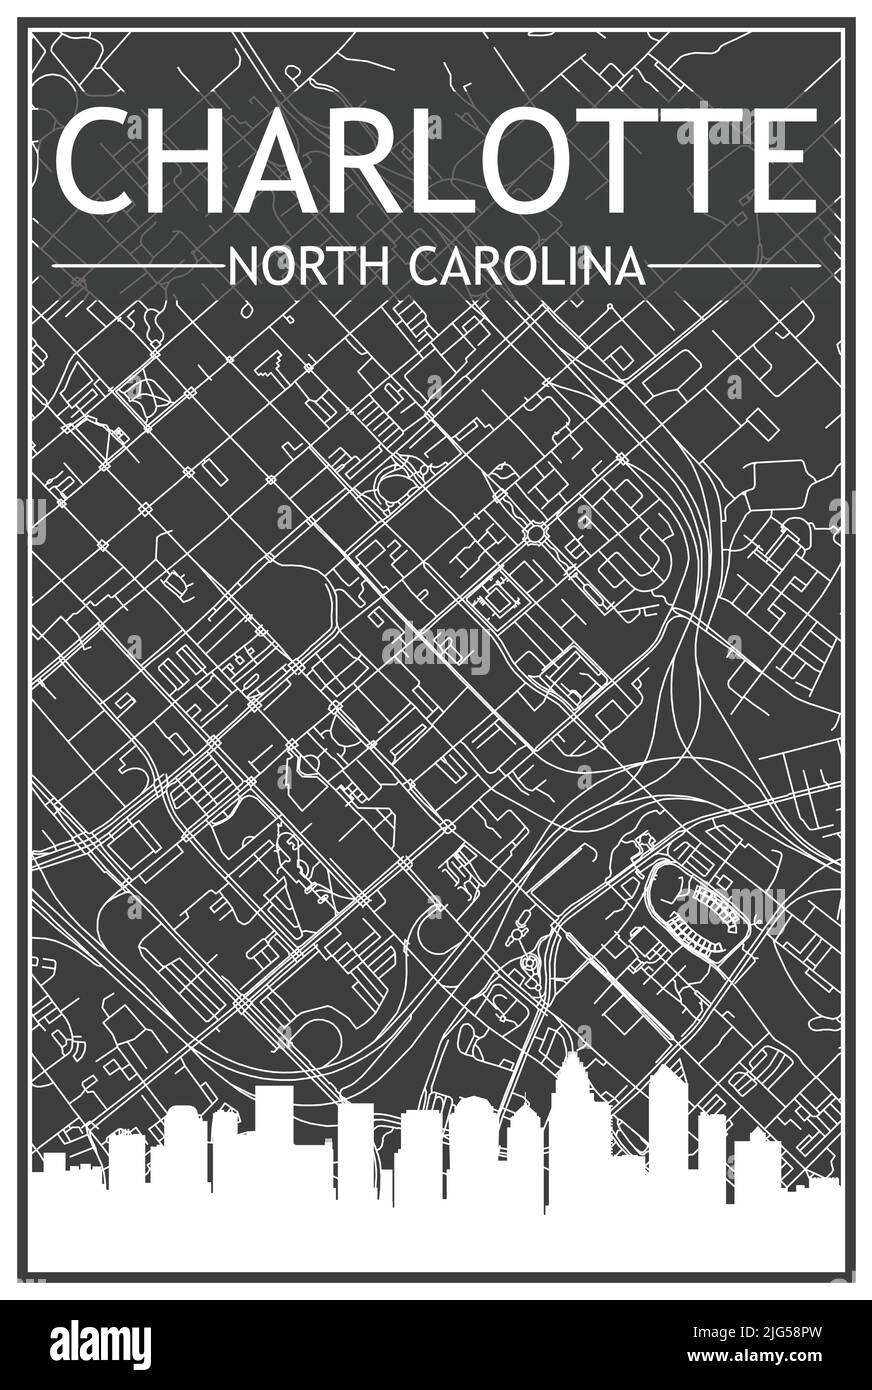 Dark printout city poster with panoramic skyline and hand-drawn streets network on dark gray background of the downtown CHARLOTTE, NORTH CAROLINA Stock Vector